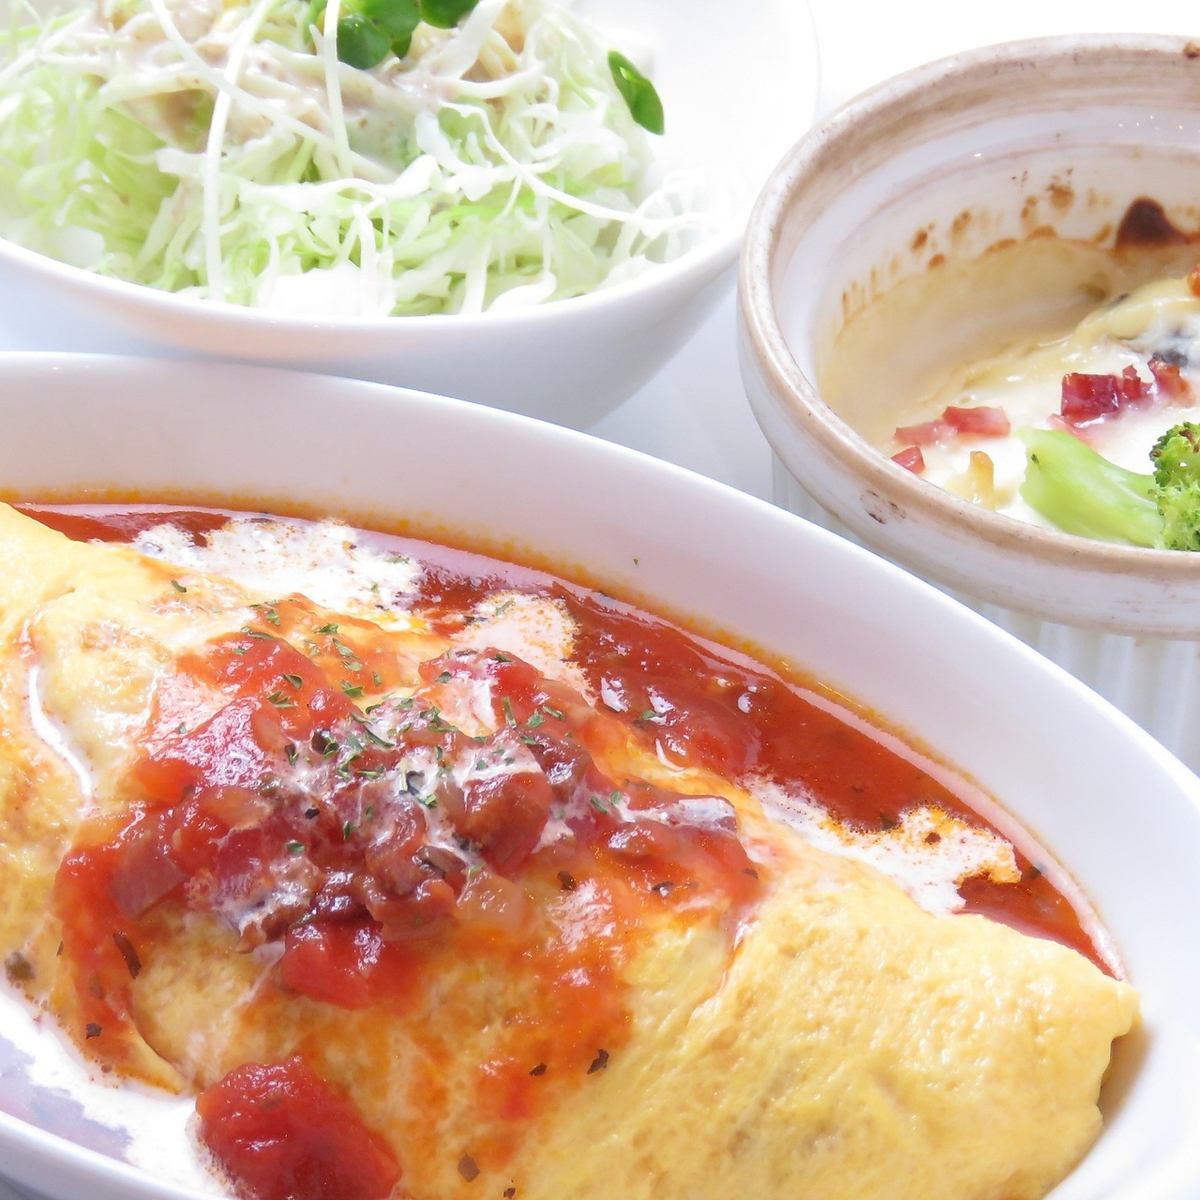 Recommended lunch★Omelet rice set for a whopping 599 yen (tax included)